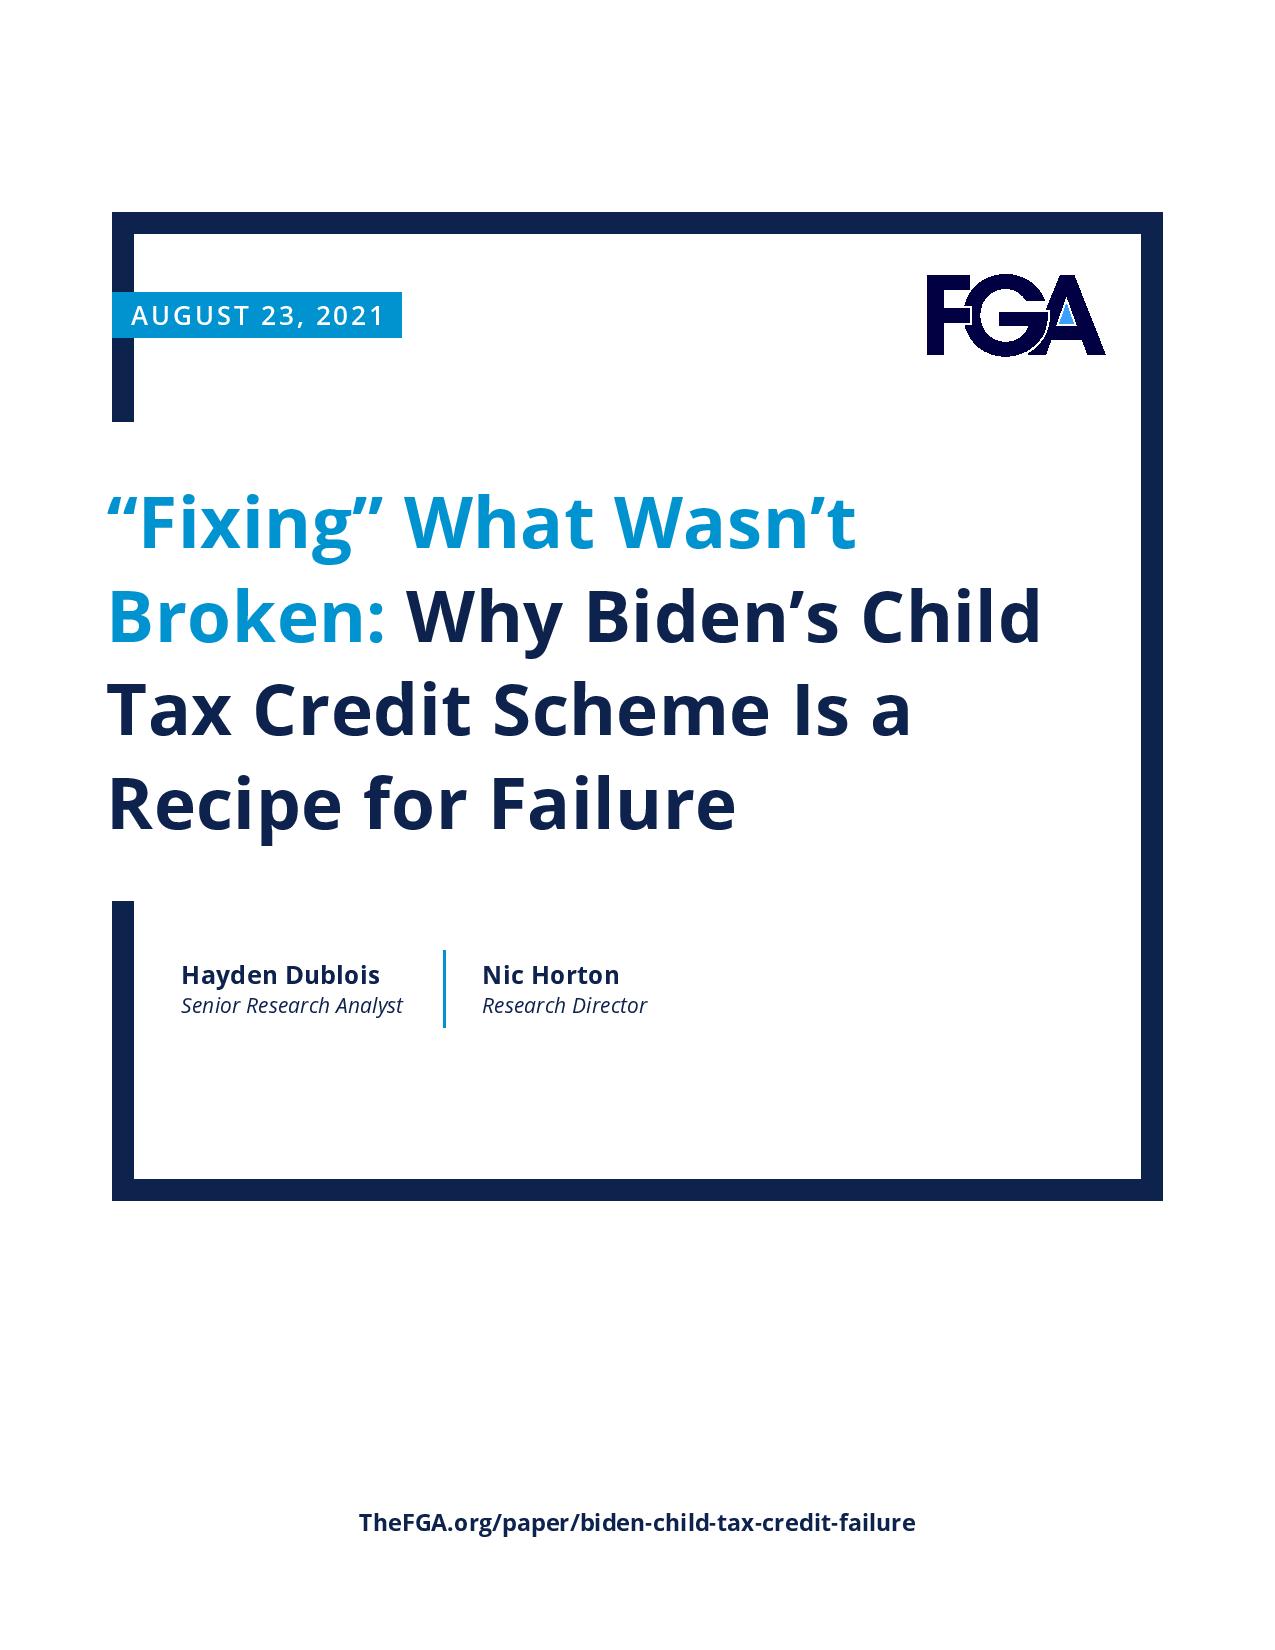 “Fixing” What Wasn’t Broken: Why Biden’s Child Tax Credit Scheme Is a Recipe for Failure